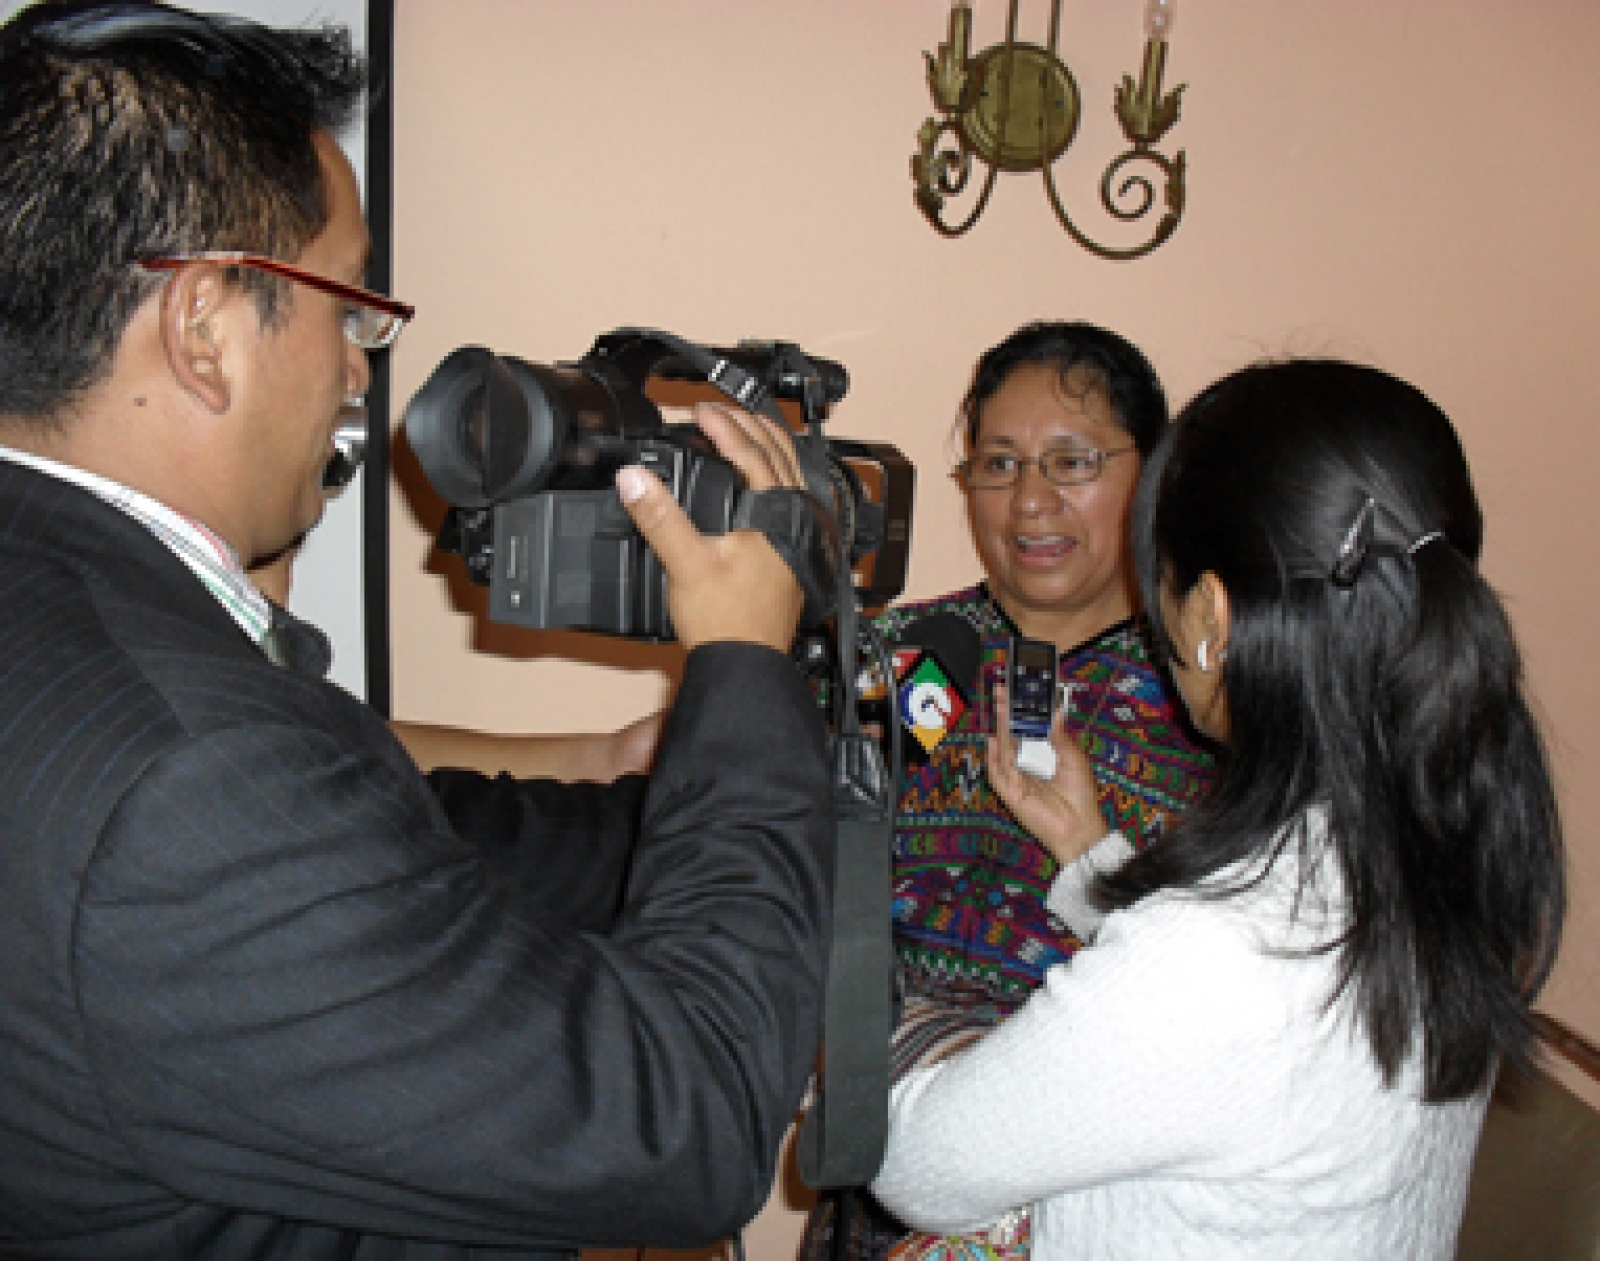 Mayan Women Train One Another to Increase their Political Voice